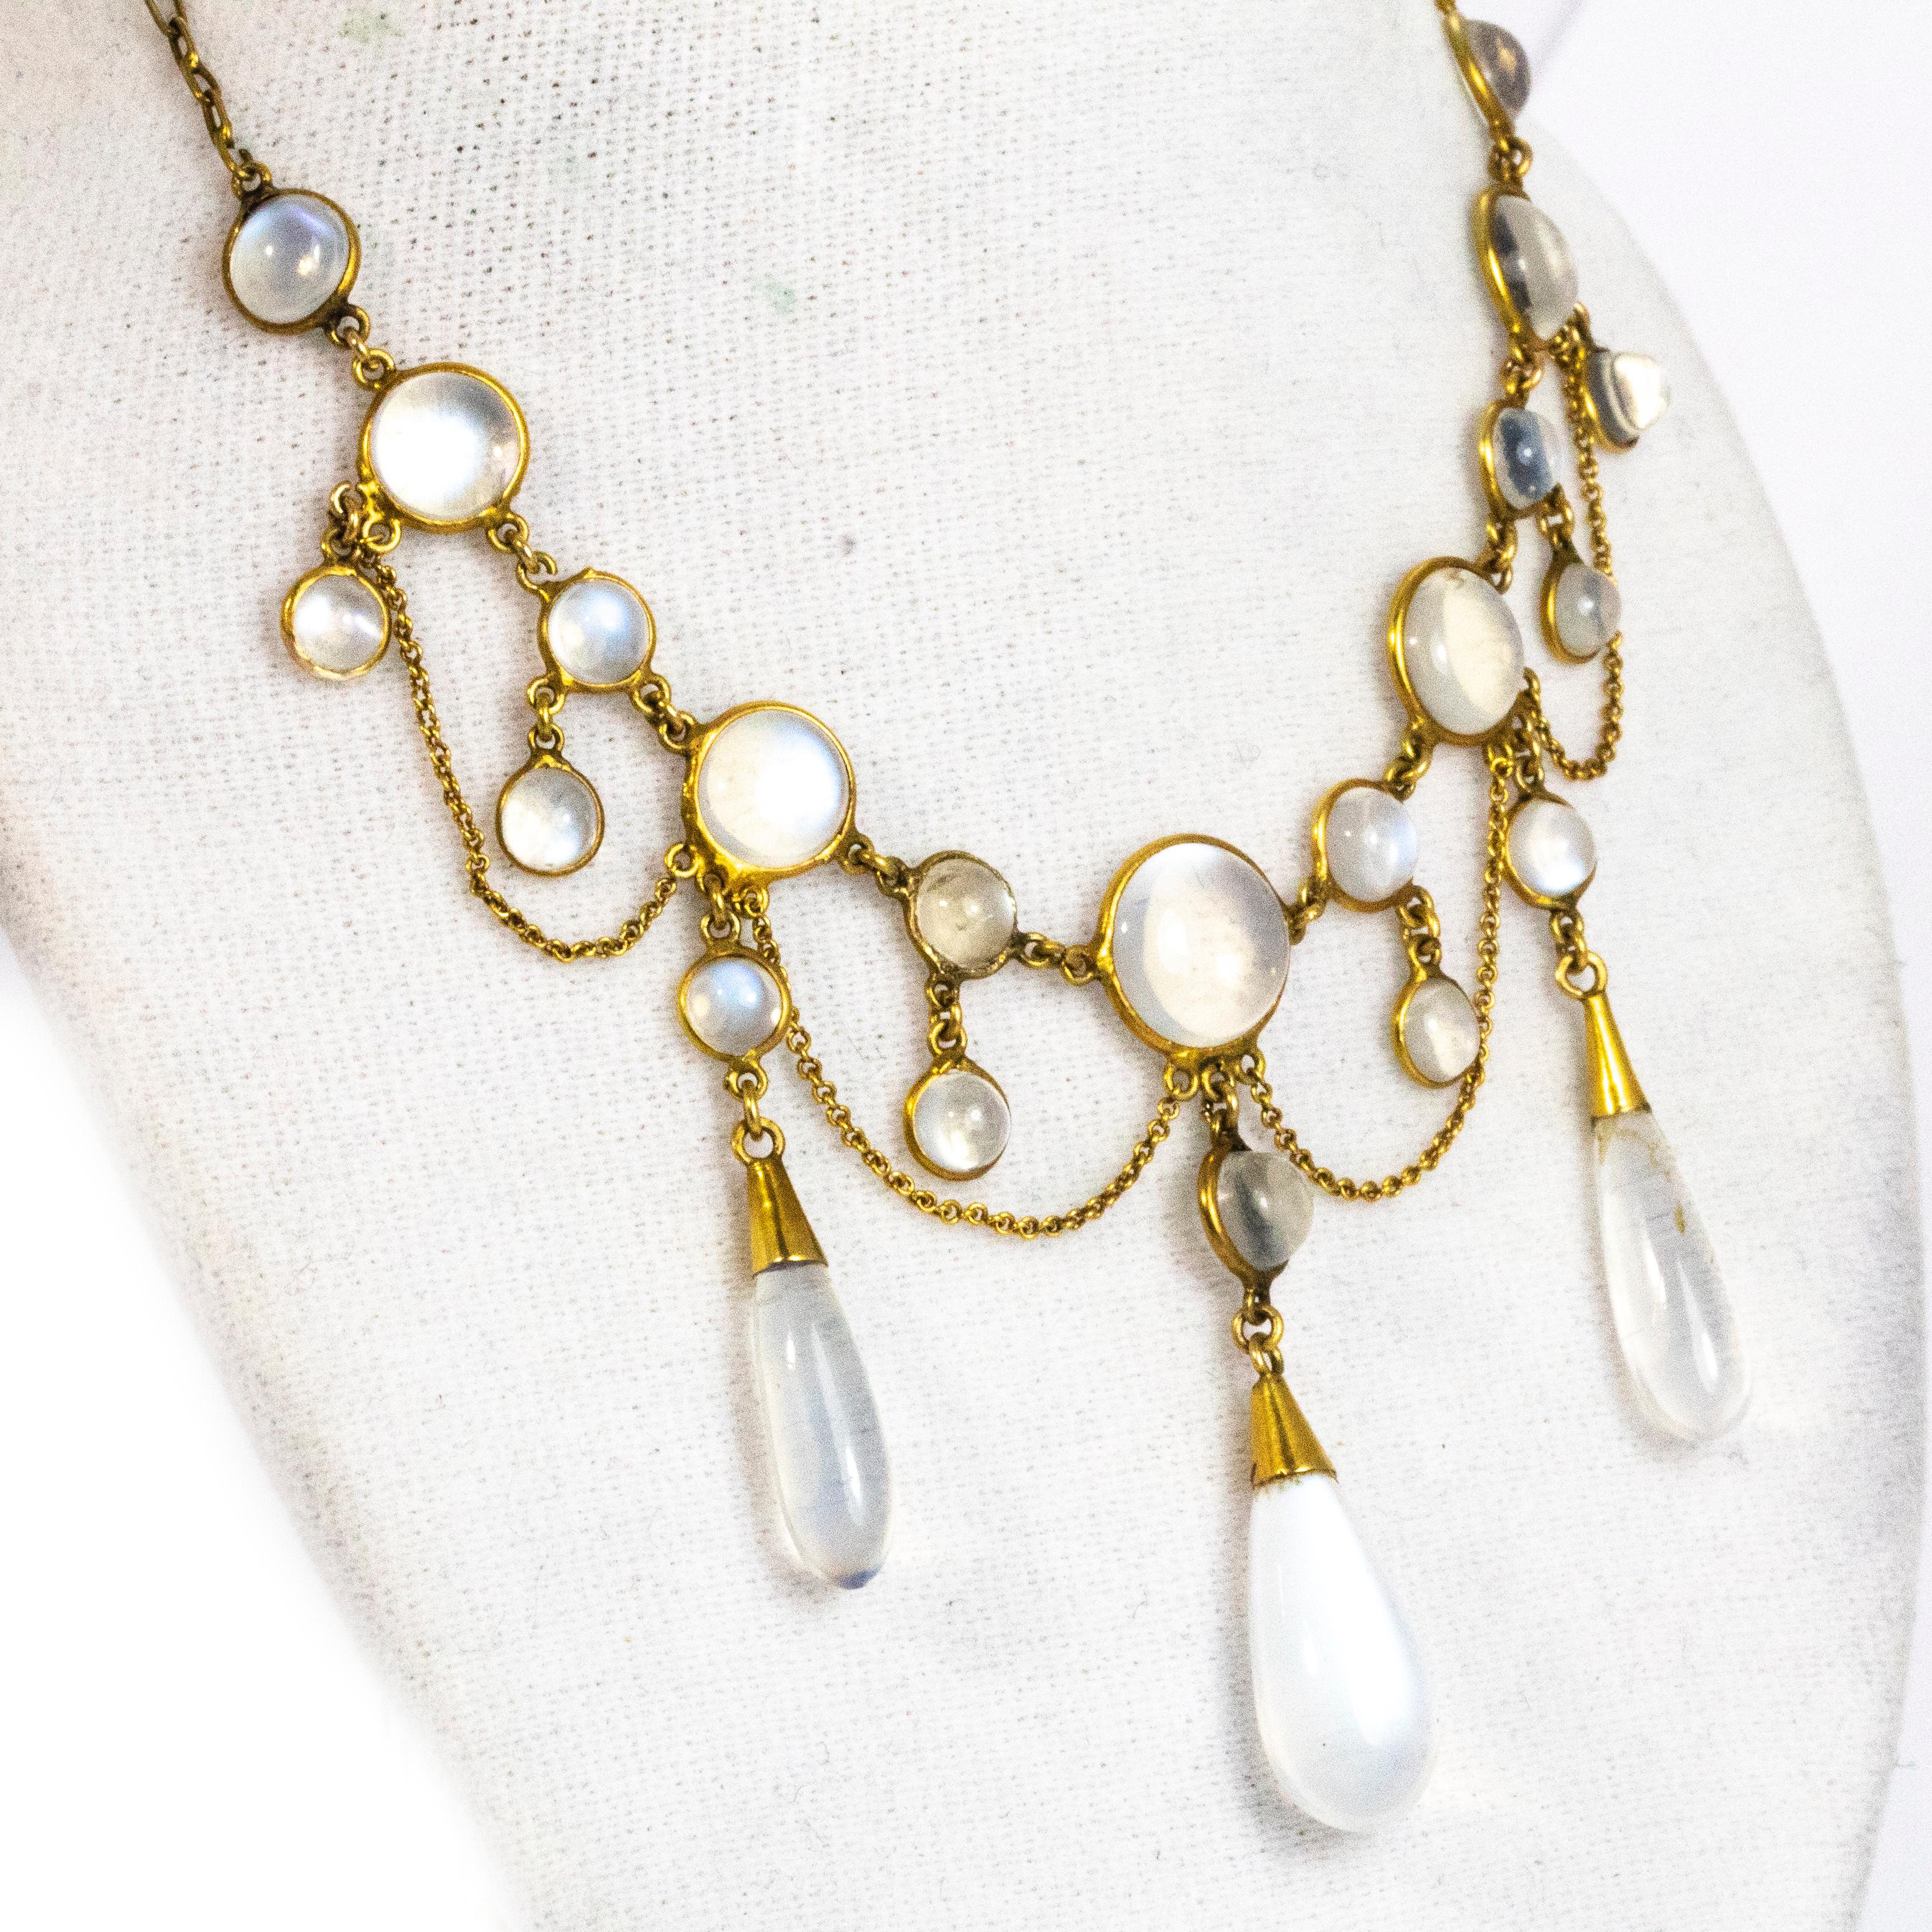 An exquisite vintage festoon necklace. The chain is set with round moonstone cabochons and small drops within the elegant swags. Three stunning long moonstone drops hang from central points giving this piece a wonderful shape. The chain is formed of